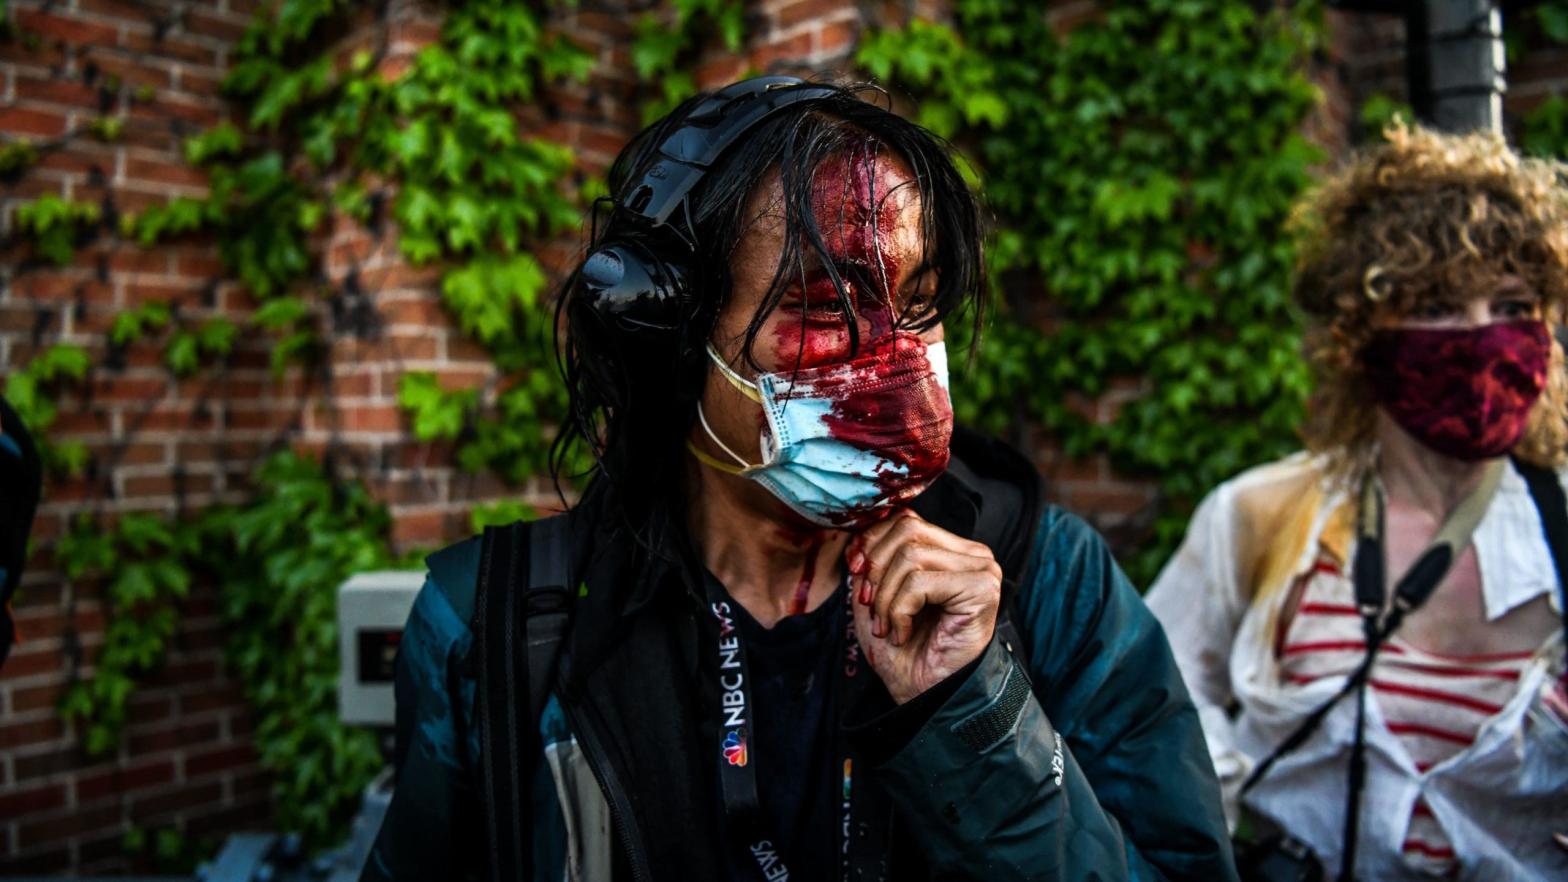 A journalist is seen bleeding after police started firing tear gas and rubber bullets near the 5th police precinct following a demonstration to call for justice for George Floyd, a black man who died while in custody of the Minneapolis police, on May 30, 2020 in Minneapolis, Minnesota. (Photo: CHANDAN KHANNA/AFP, Getty Images)